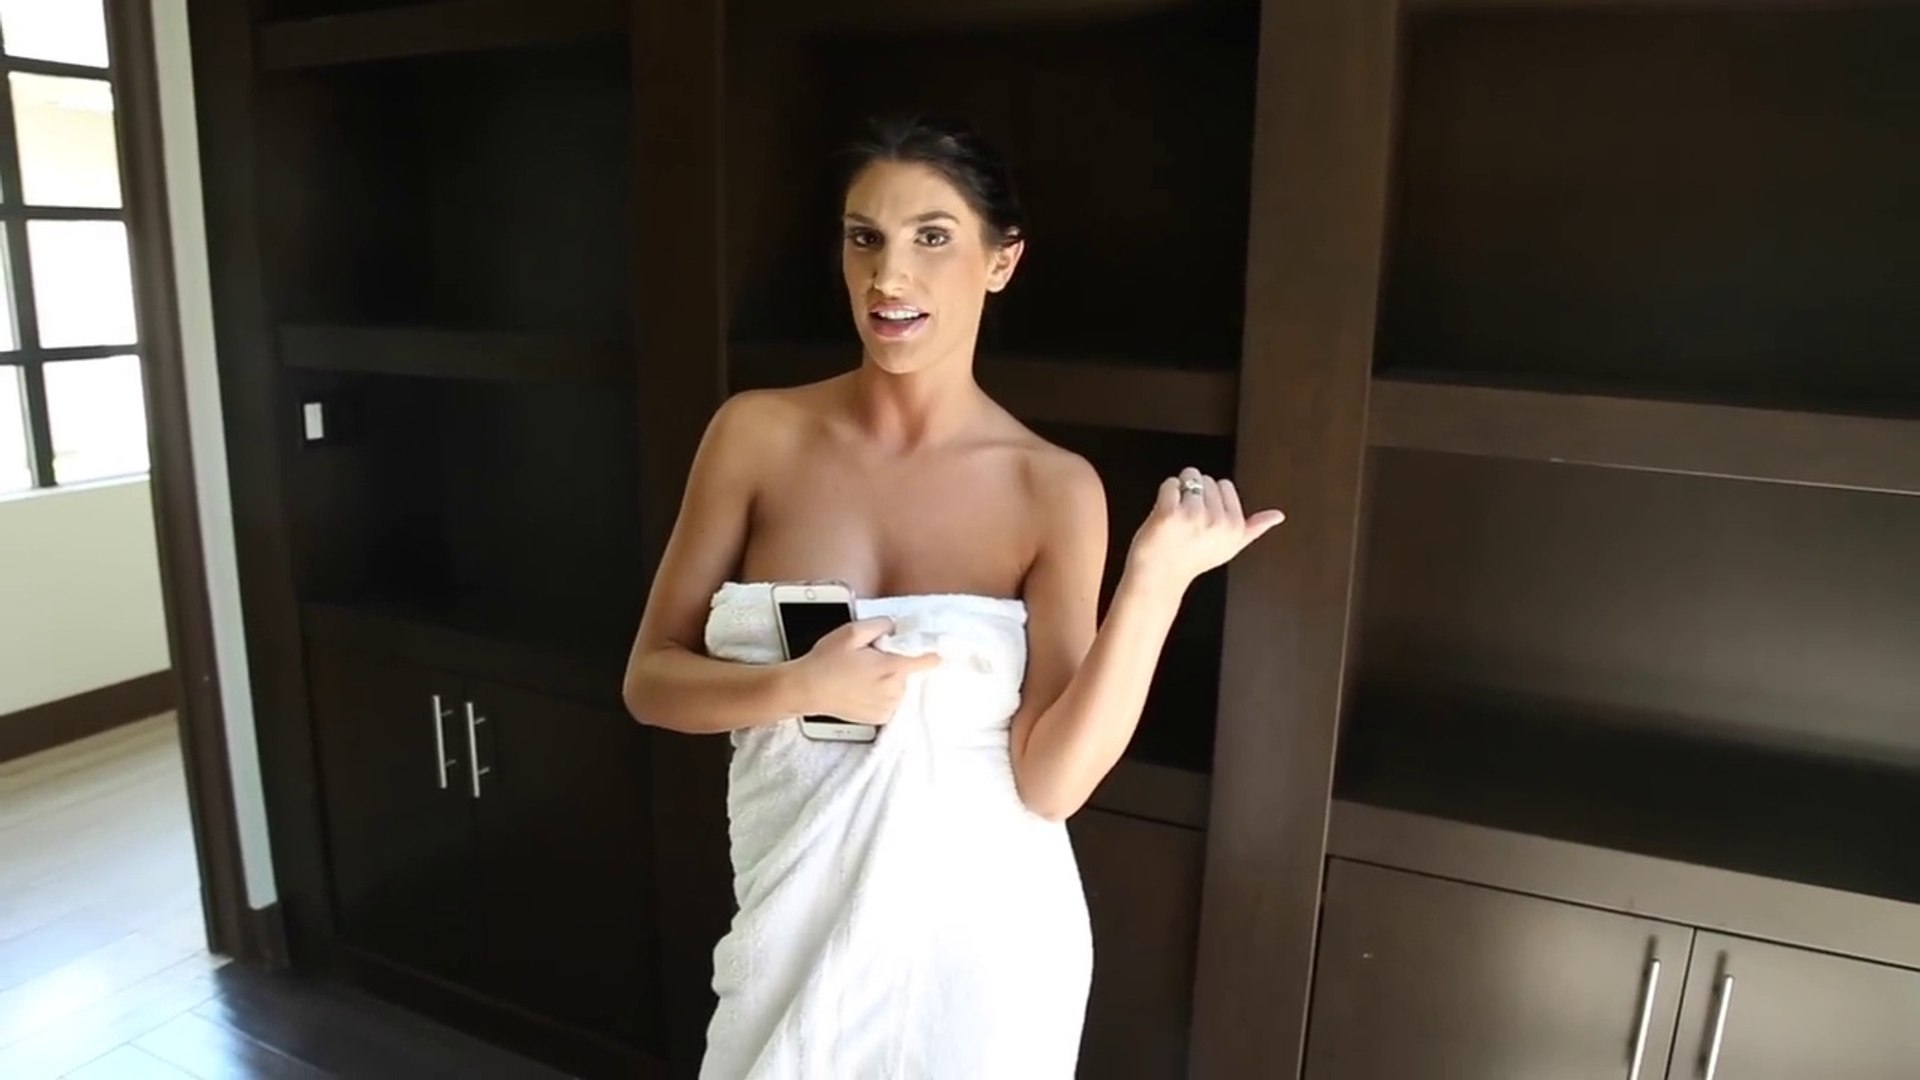 chelsea oxford recommends august ames scenes pic